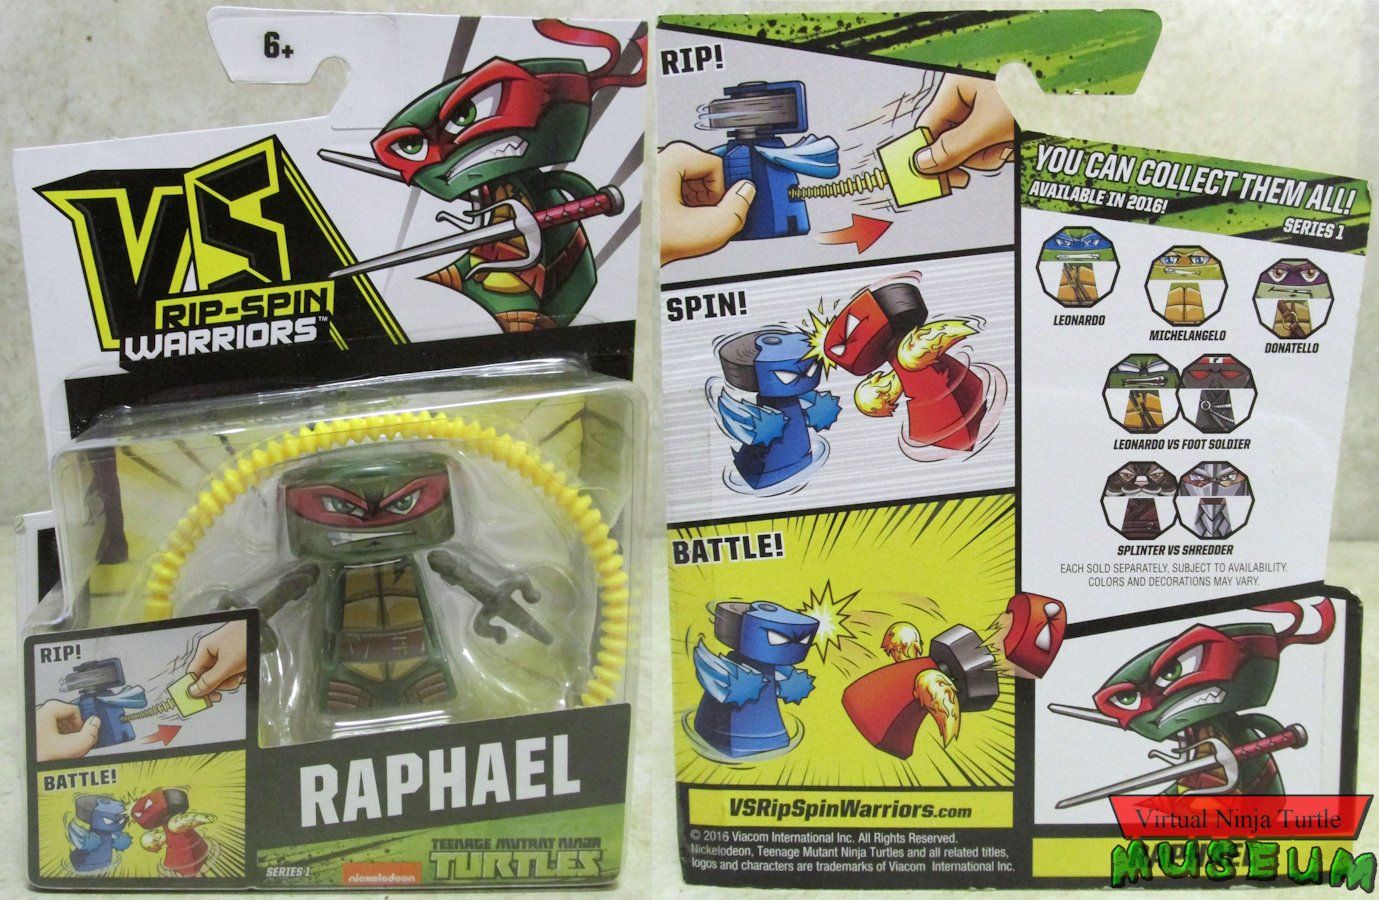 Rip-Spin Warriors Raphael card front and back